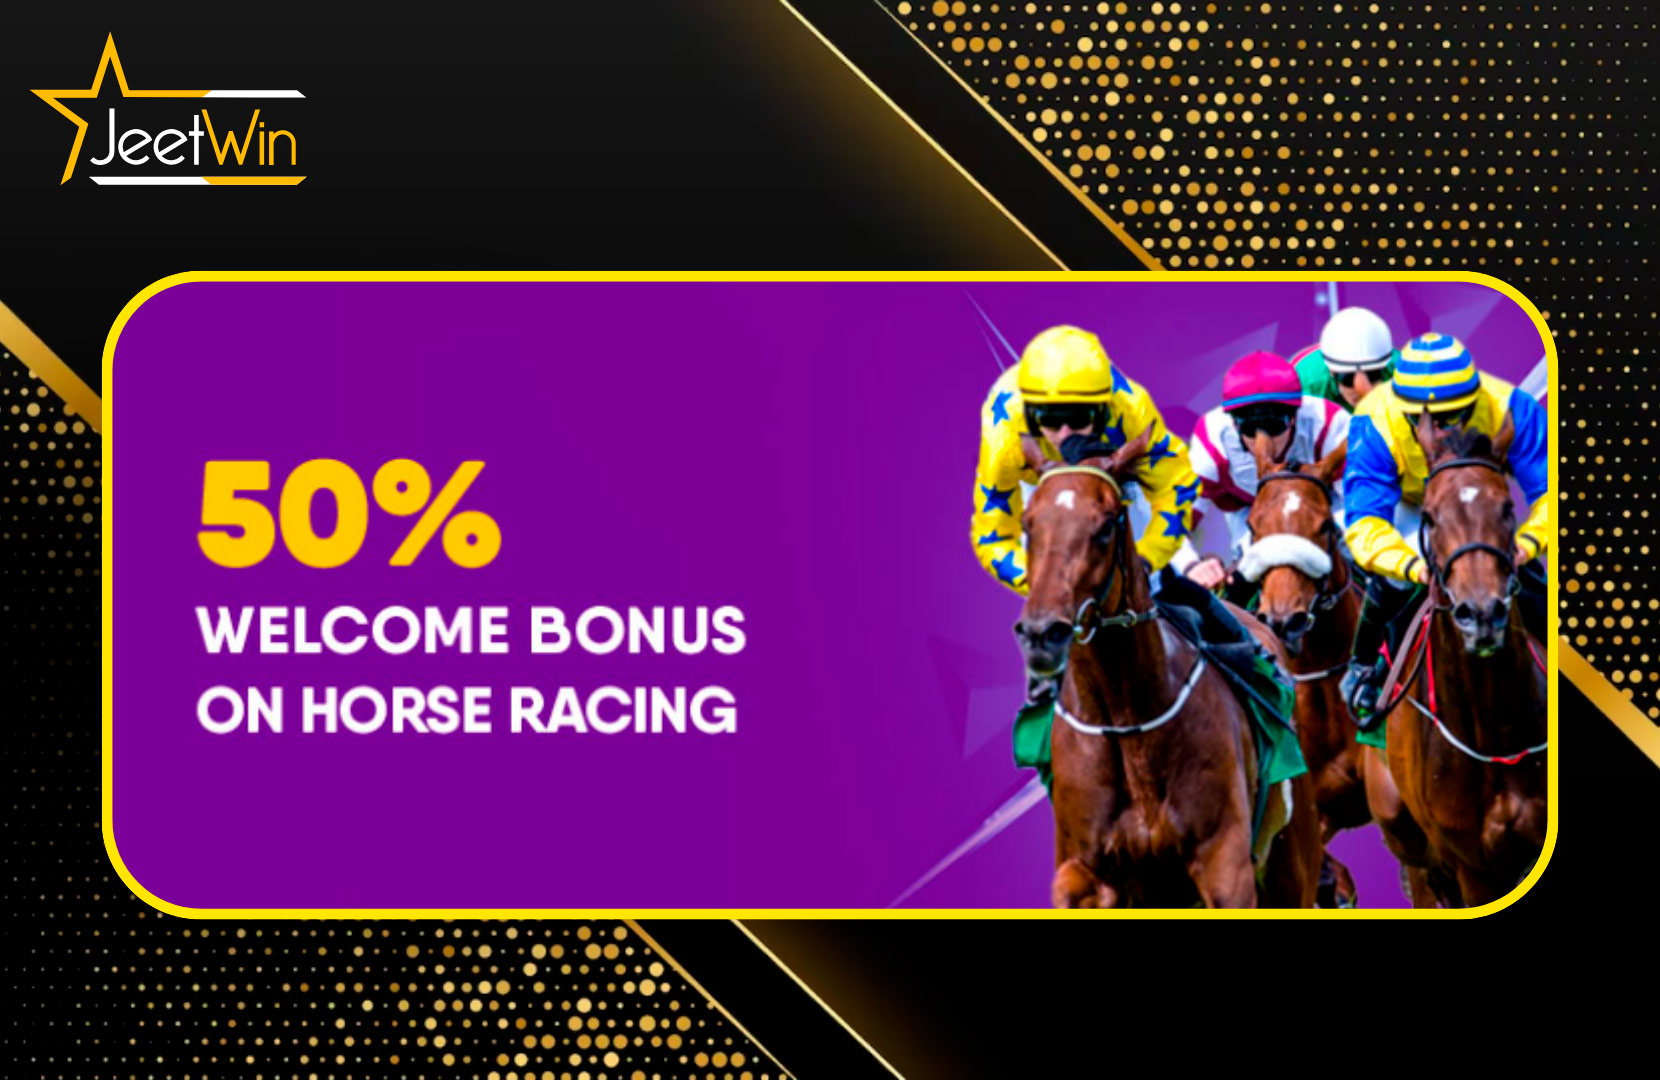 Bet on Your Favorite Sports with Jeetwin and Get Exciting Bonuses